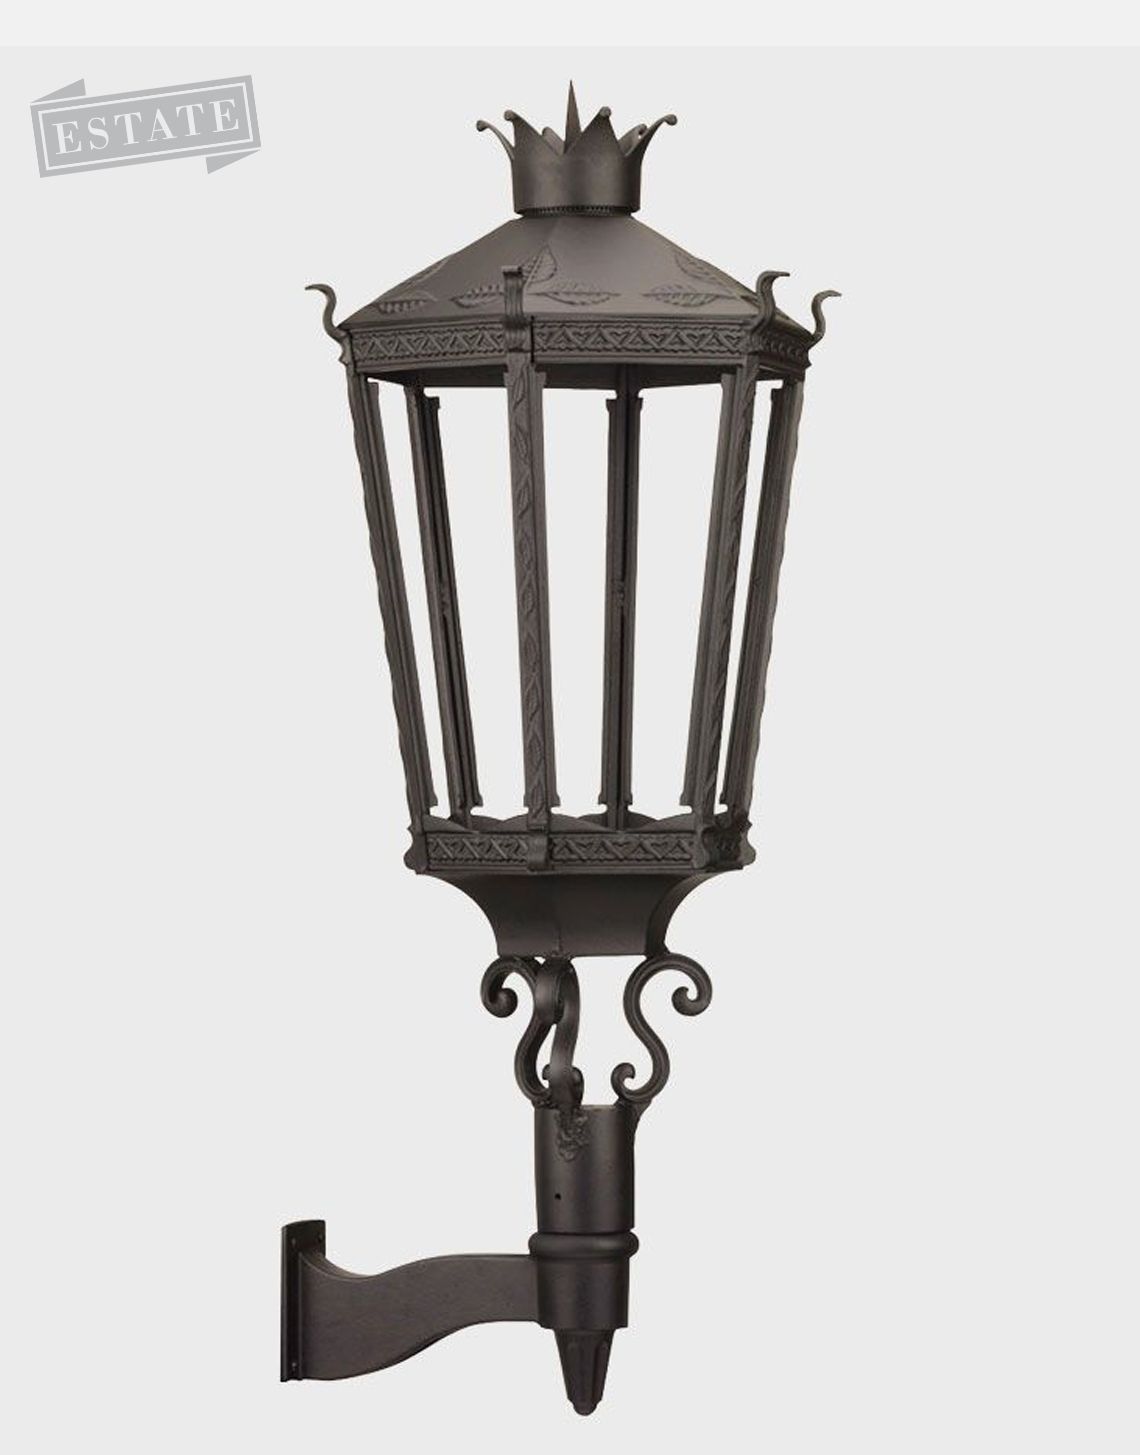 Estate Size Outdoor Gas Lights | American Gas Lamp Works Throughout Outdoor Wall Mount Gas Lights (View 13 of 15)